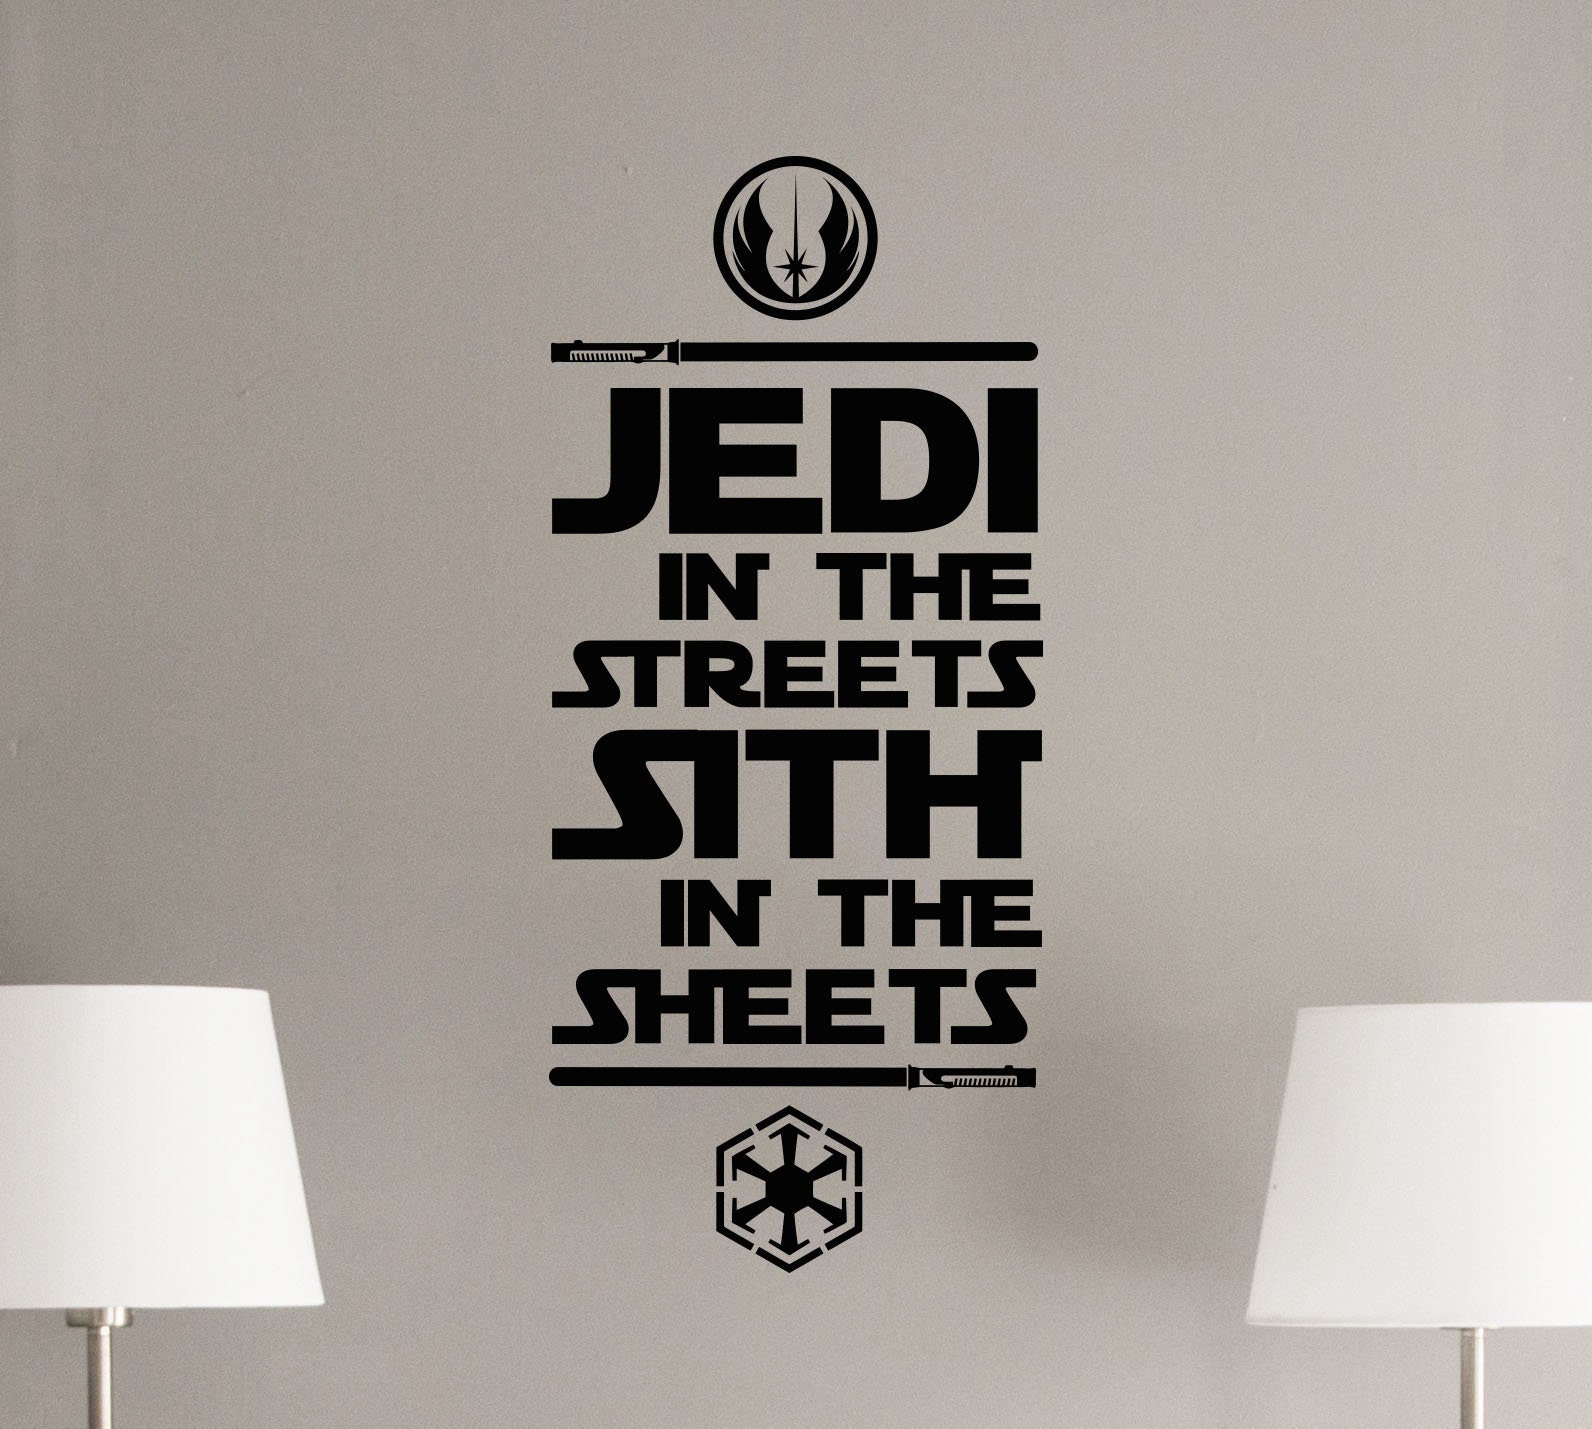 Jedi in the street sith in the sheets